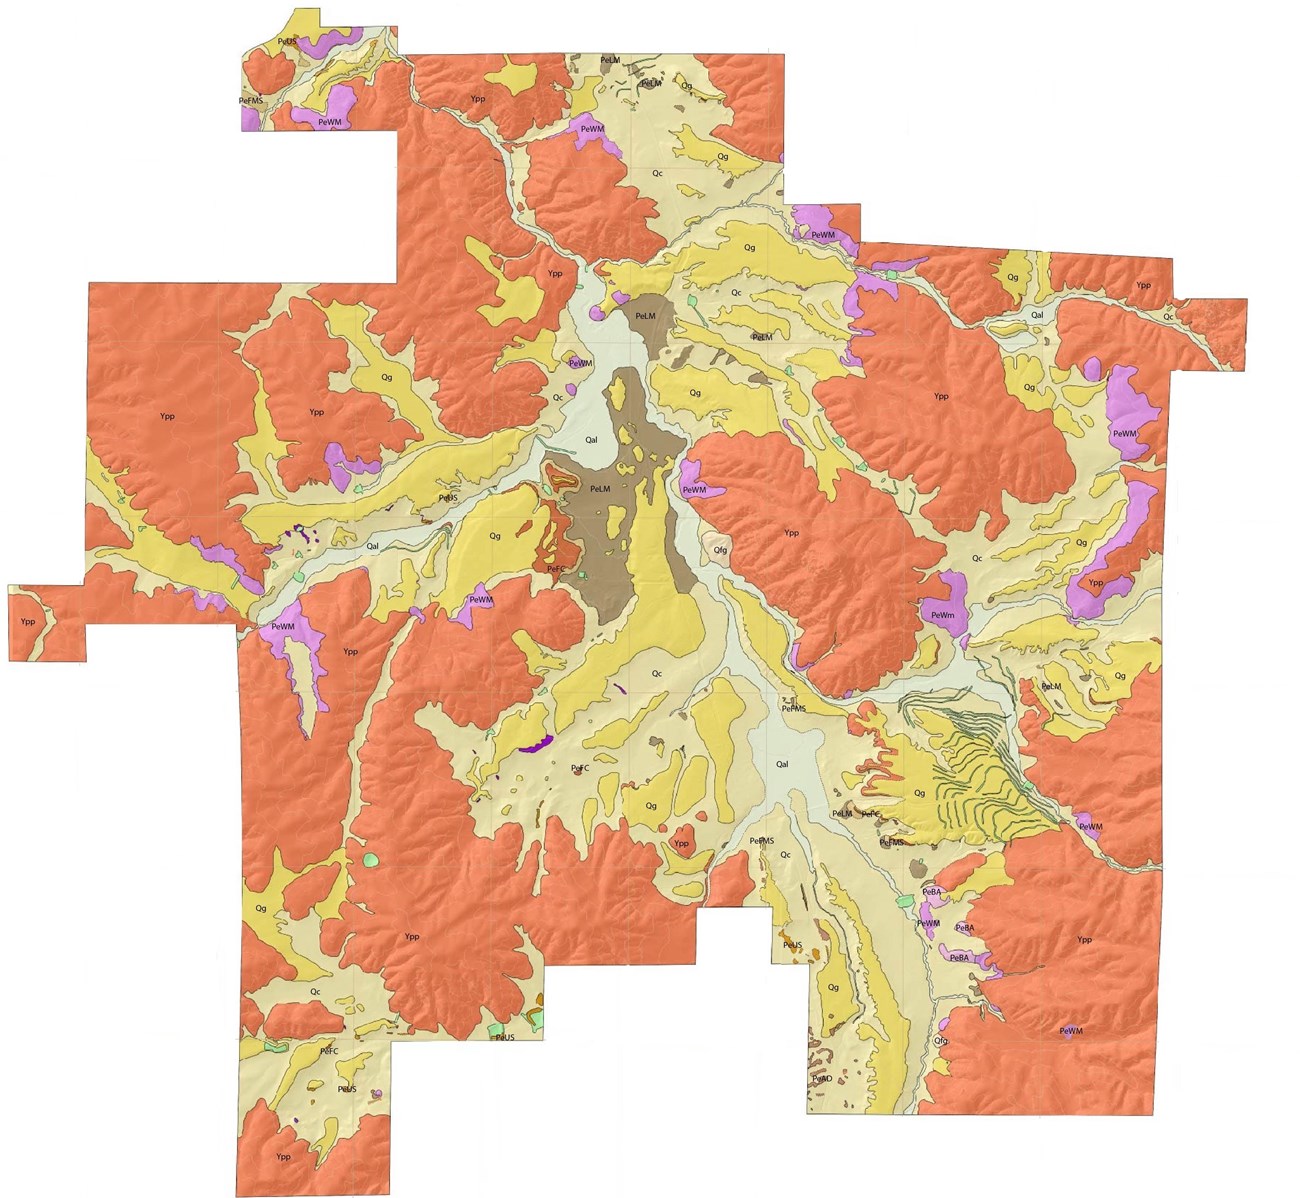 Image of a geologic map of the park area.